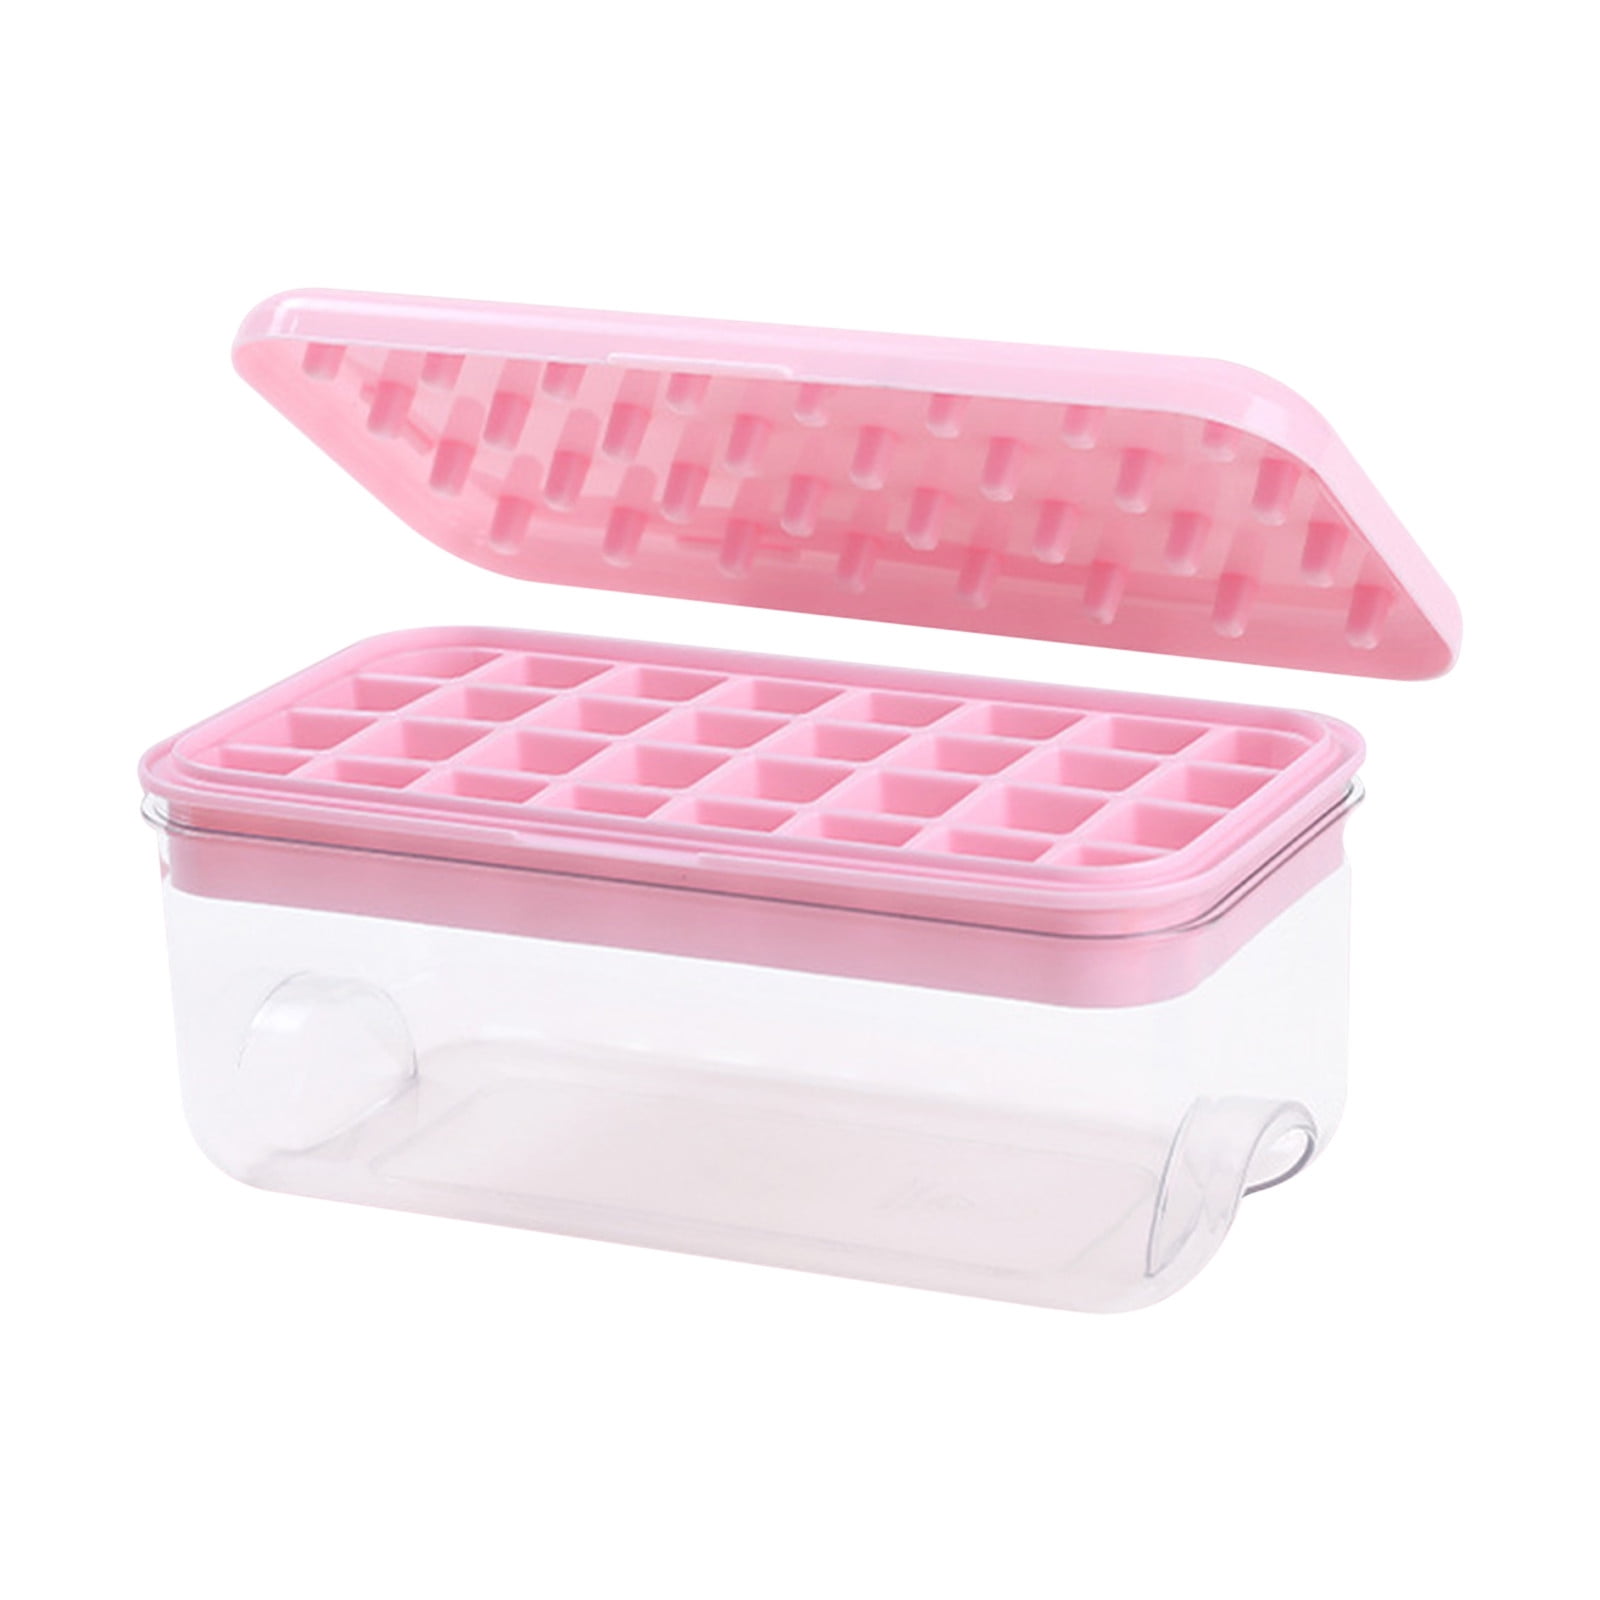 Easy Release Silicone 32 Ice Cuber Tray with Press lid and Bin